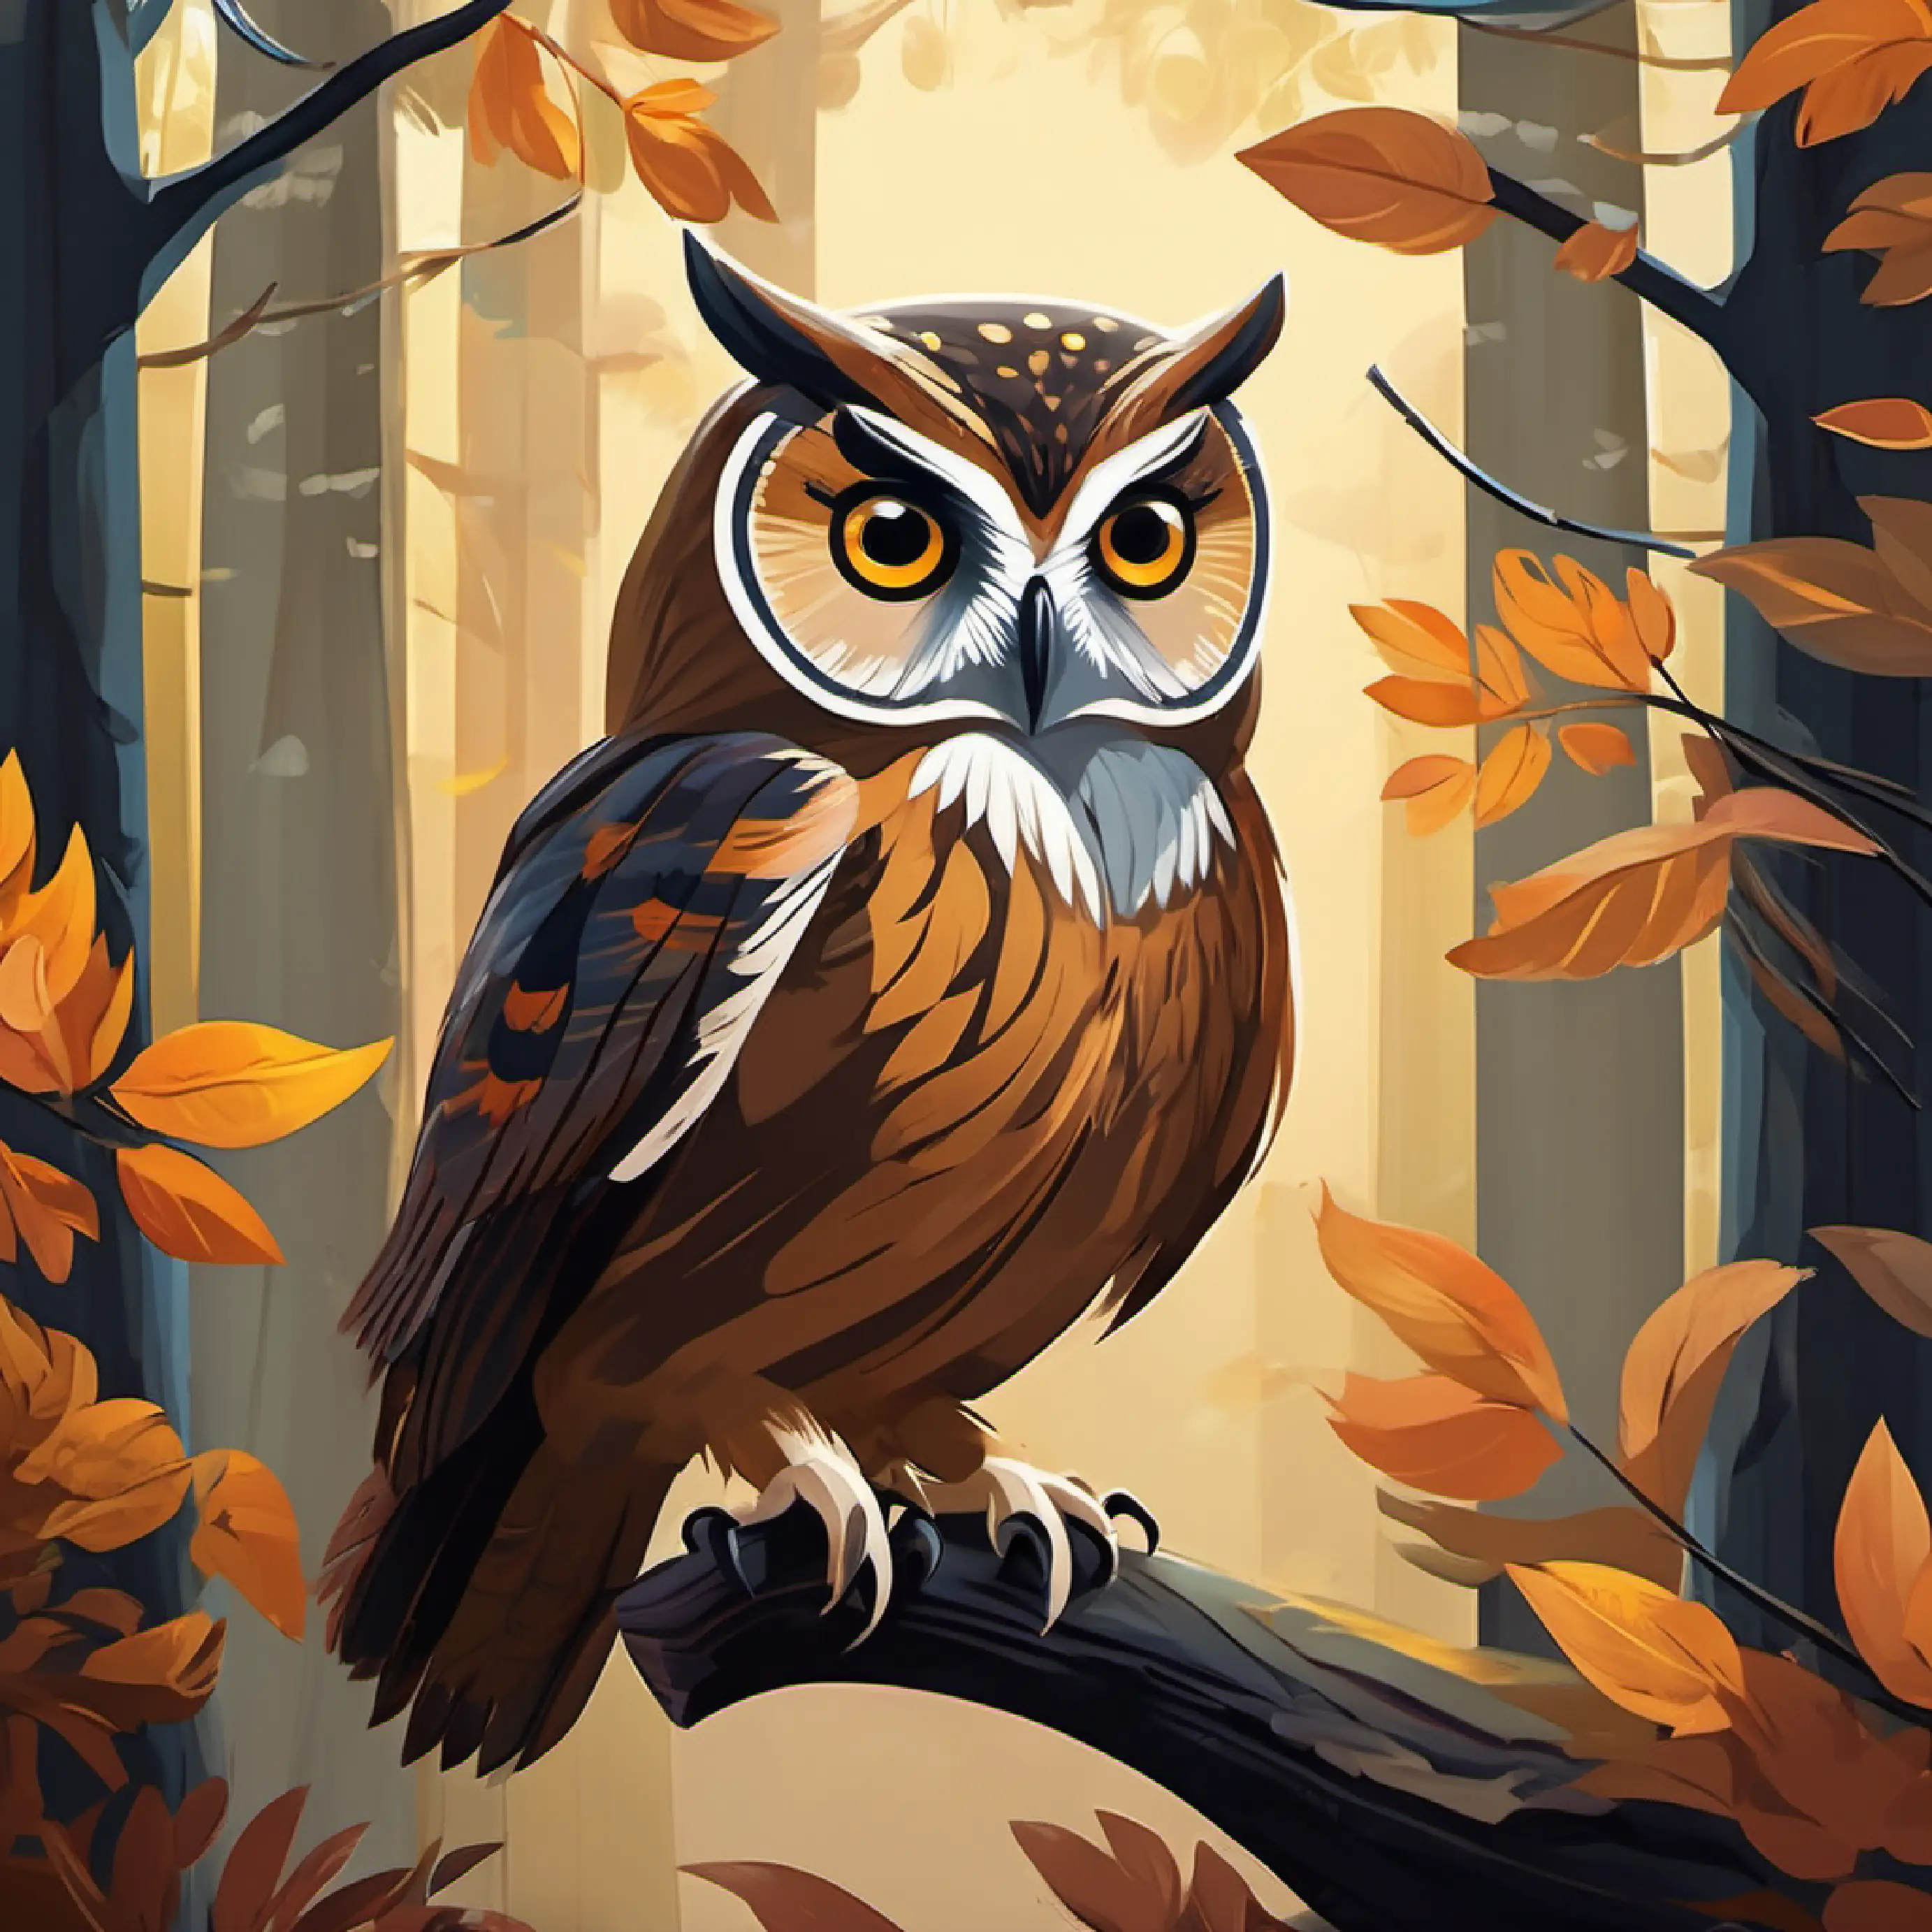 Meeting Owl, dark feathers, wise look, big round eyes the owl, forest comes alive with song and dance